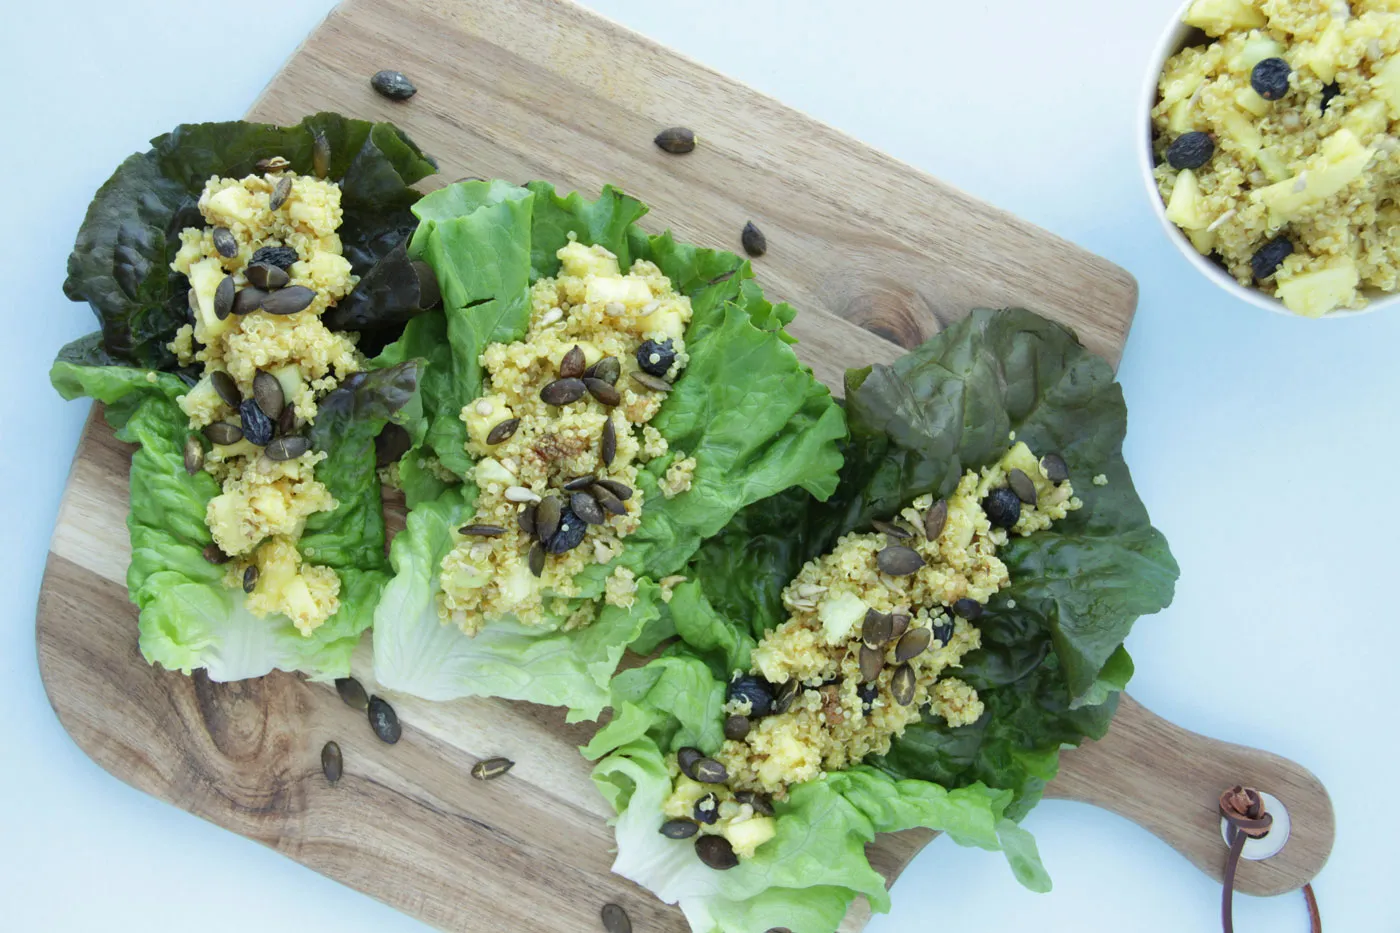 Vegan Lettuce Tacos filled with Quinoa Apple Salad and Curry Citrus Dressing